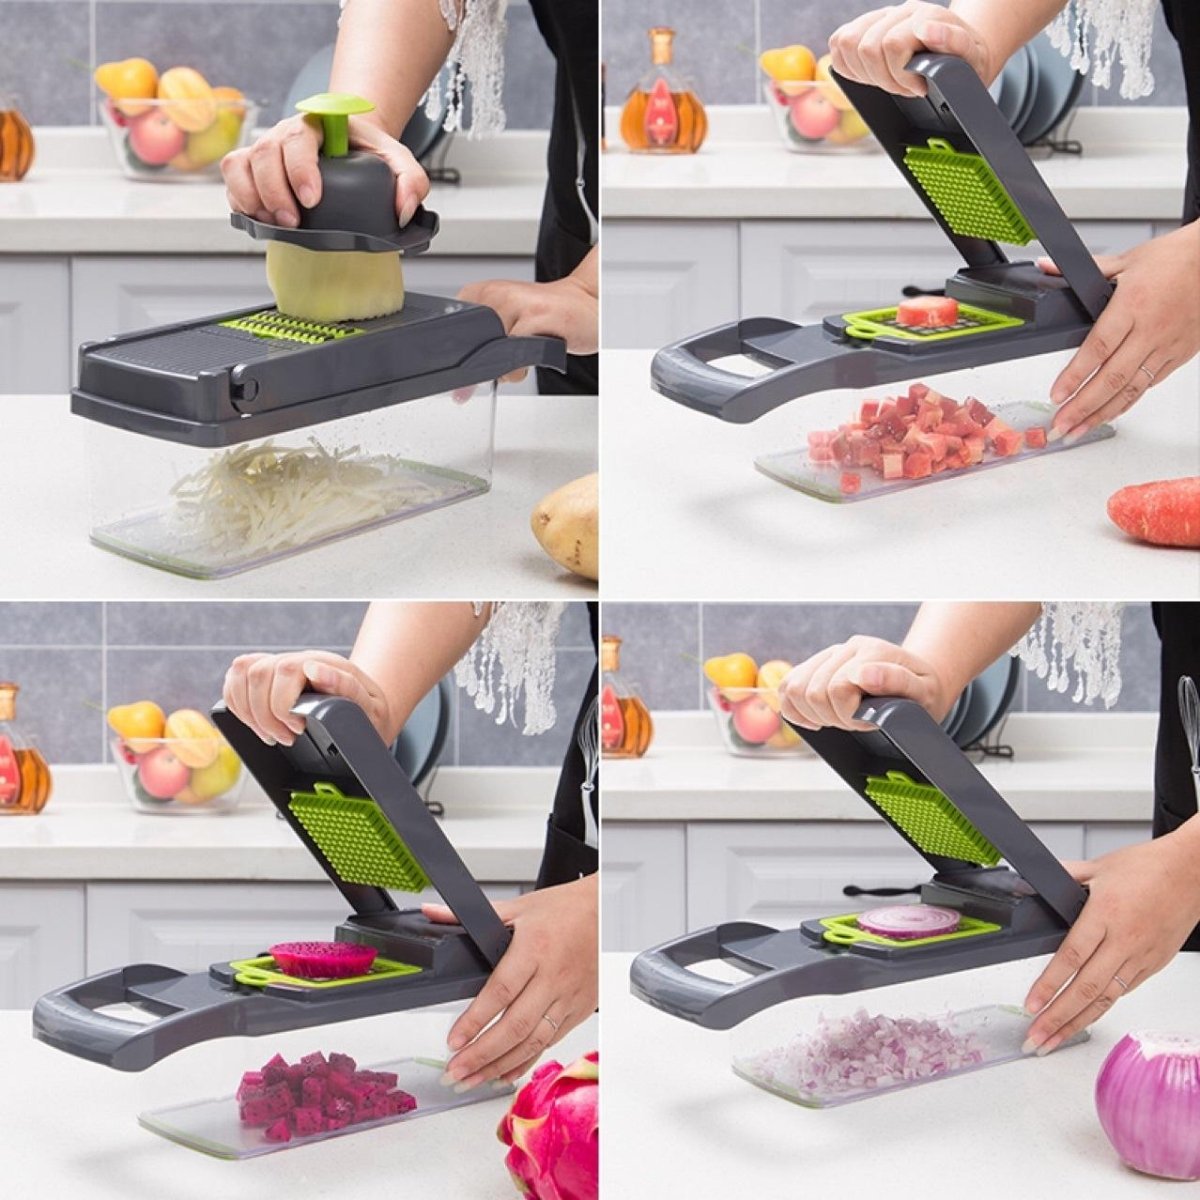 Multi-Function Manual Vegetable Chopper and Slicer - 12-in-1 Kitchen Tool for Chopping, Slicing, and Dicing Onions, Vegetables, and More - InspiredGrabs.com